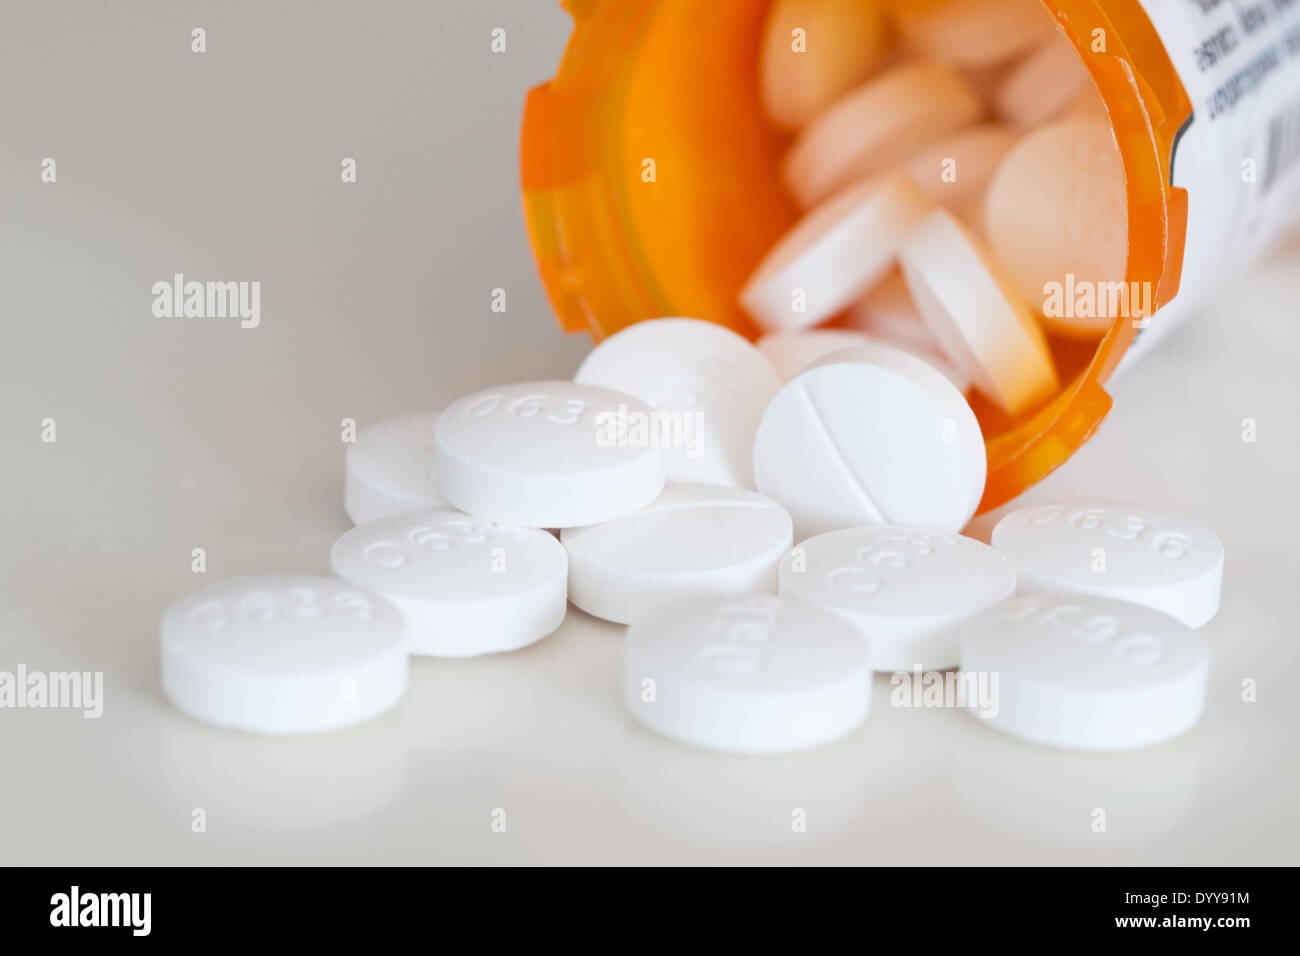 Percocet (oxycodone / paracetamol) tablets.  Percocet is a narcotic pain reliever used to treat moderate to severe acute pain. Stock Photo